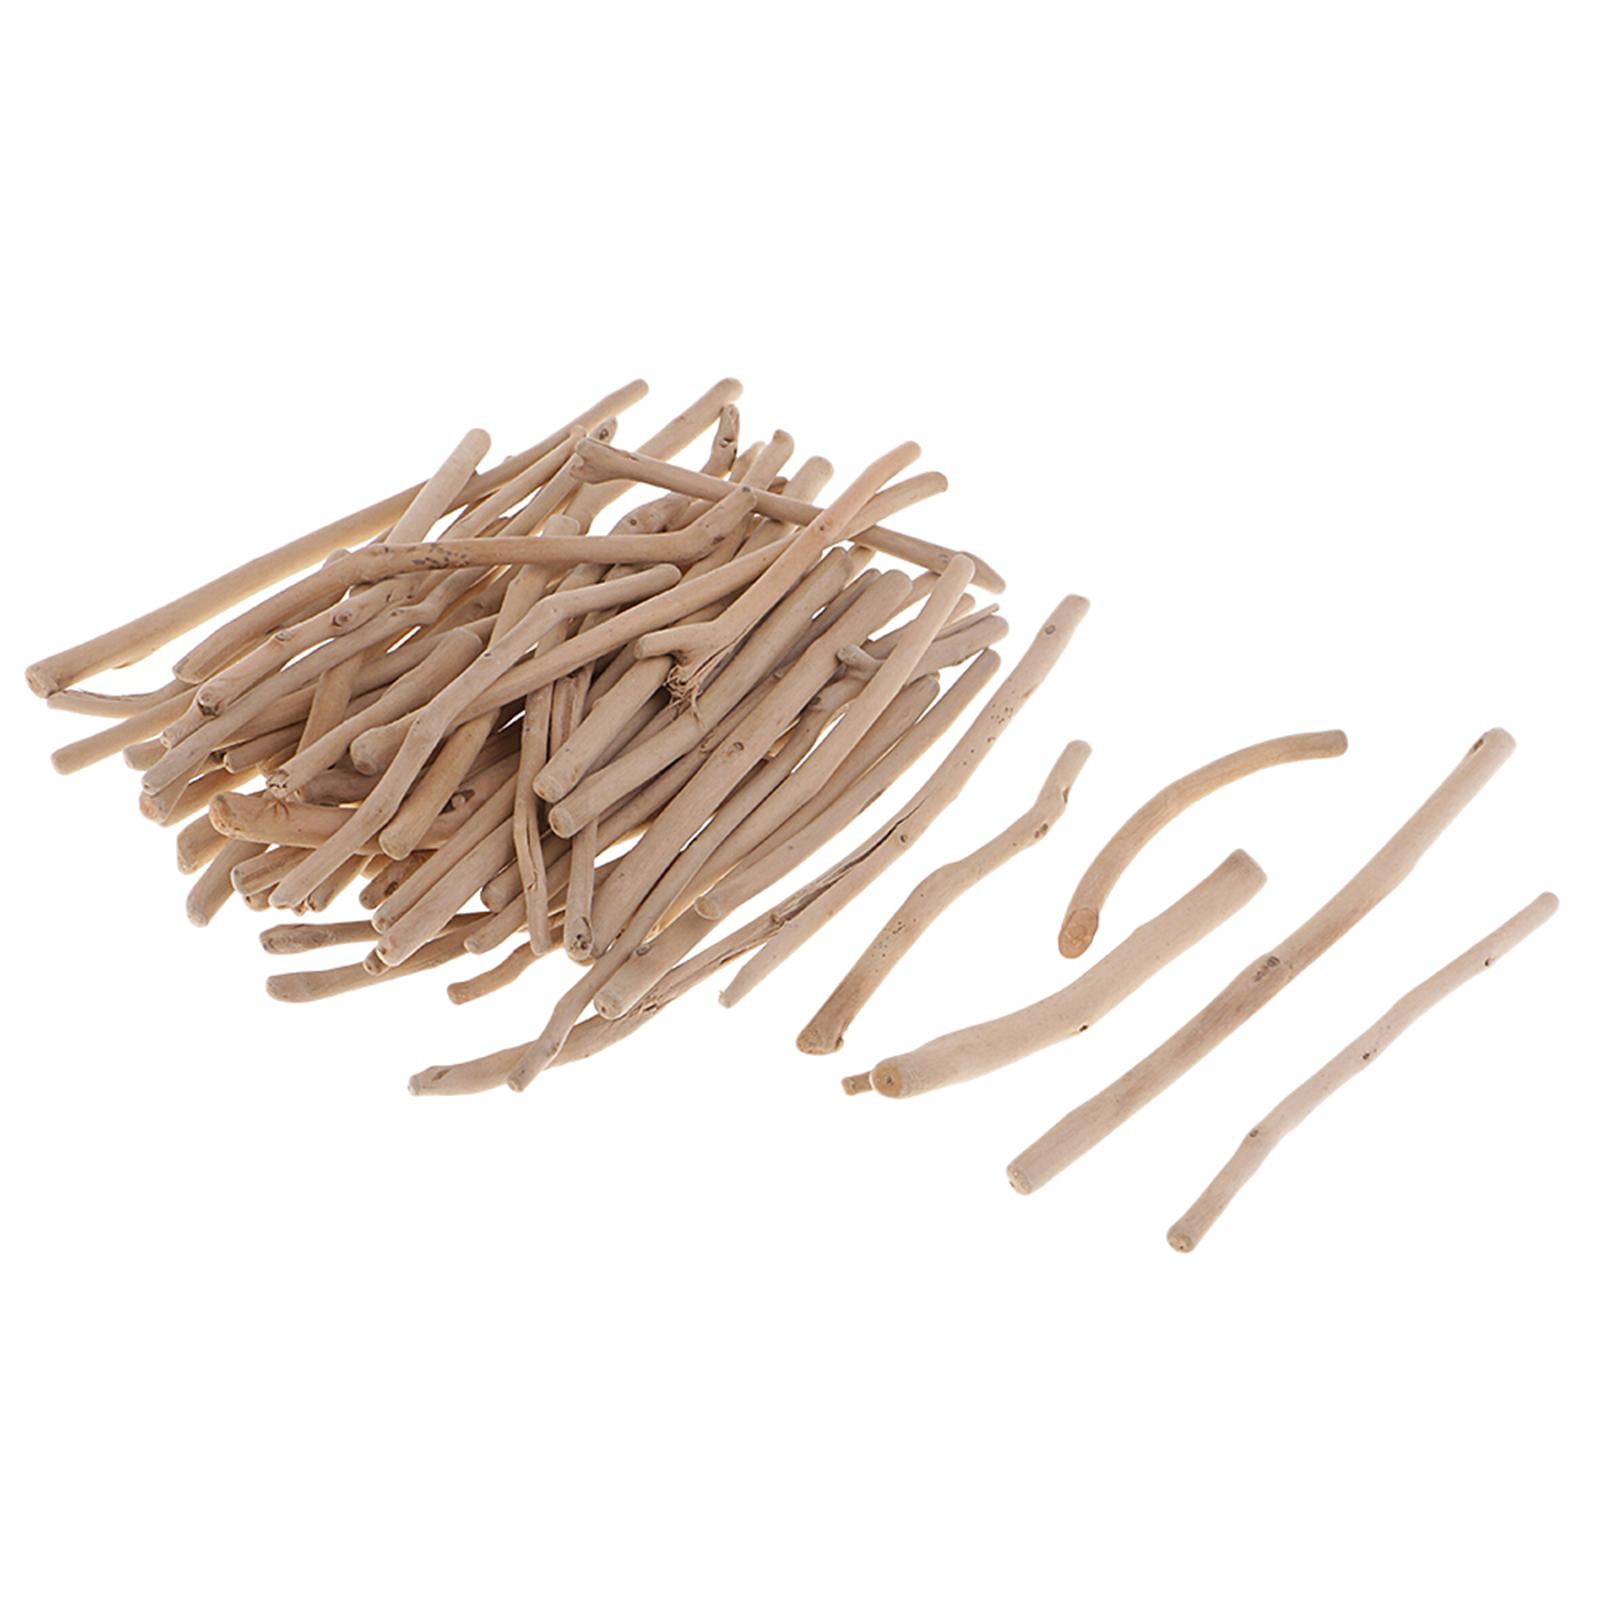 125g Quality Driftwood Sticks Wood Craft Pieces DIY Tealight Candle Holders 